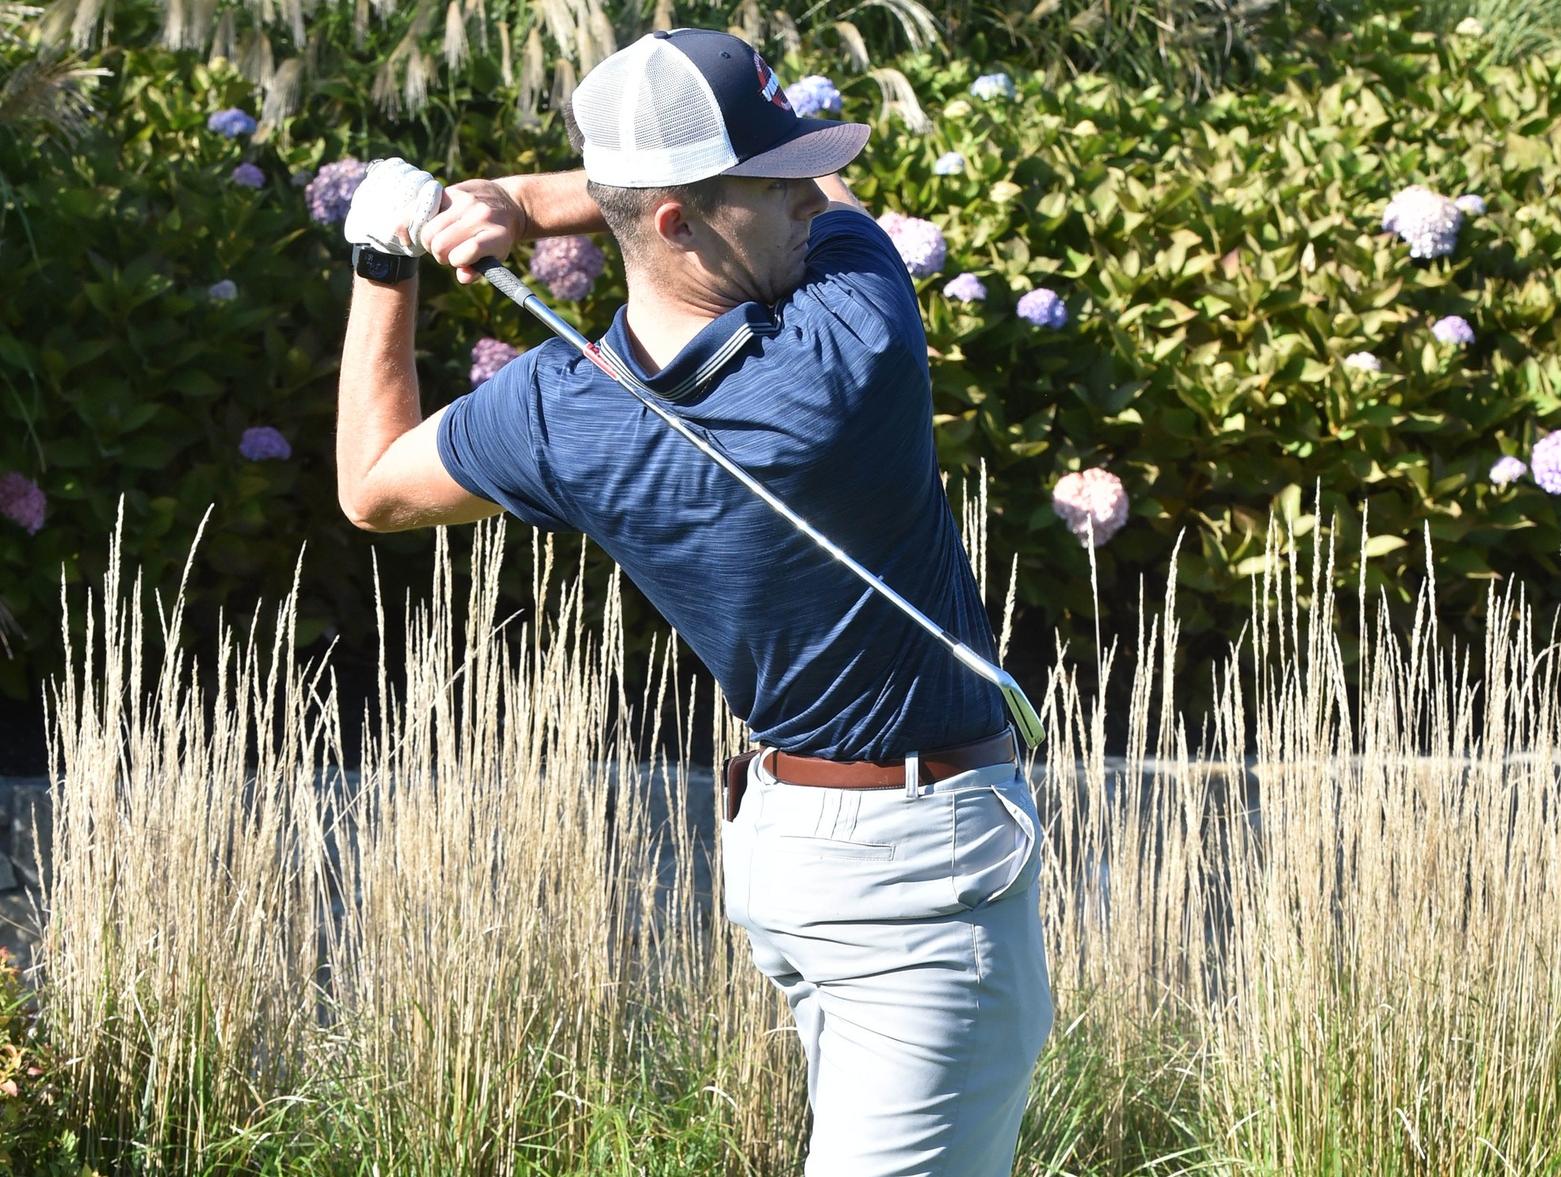 Salem State Ties For Second at Rhode Island Spring Invite